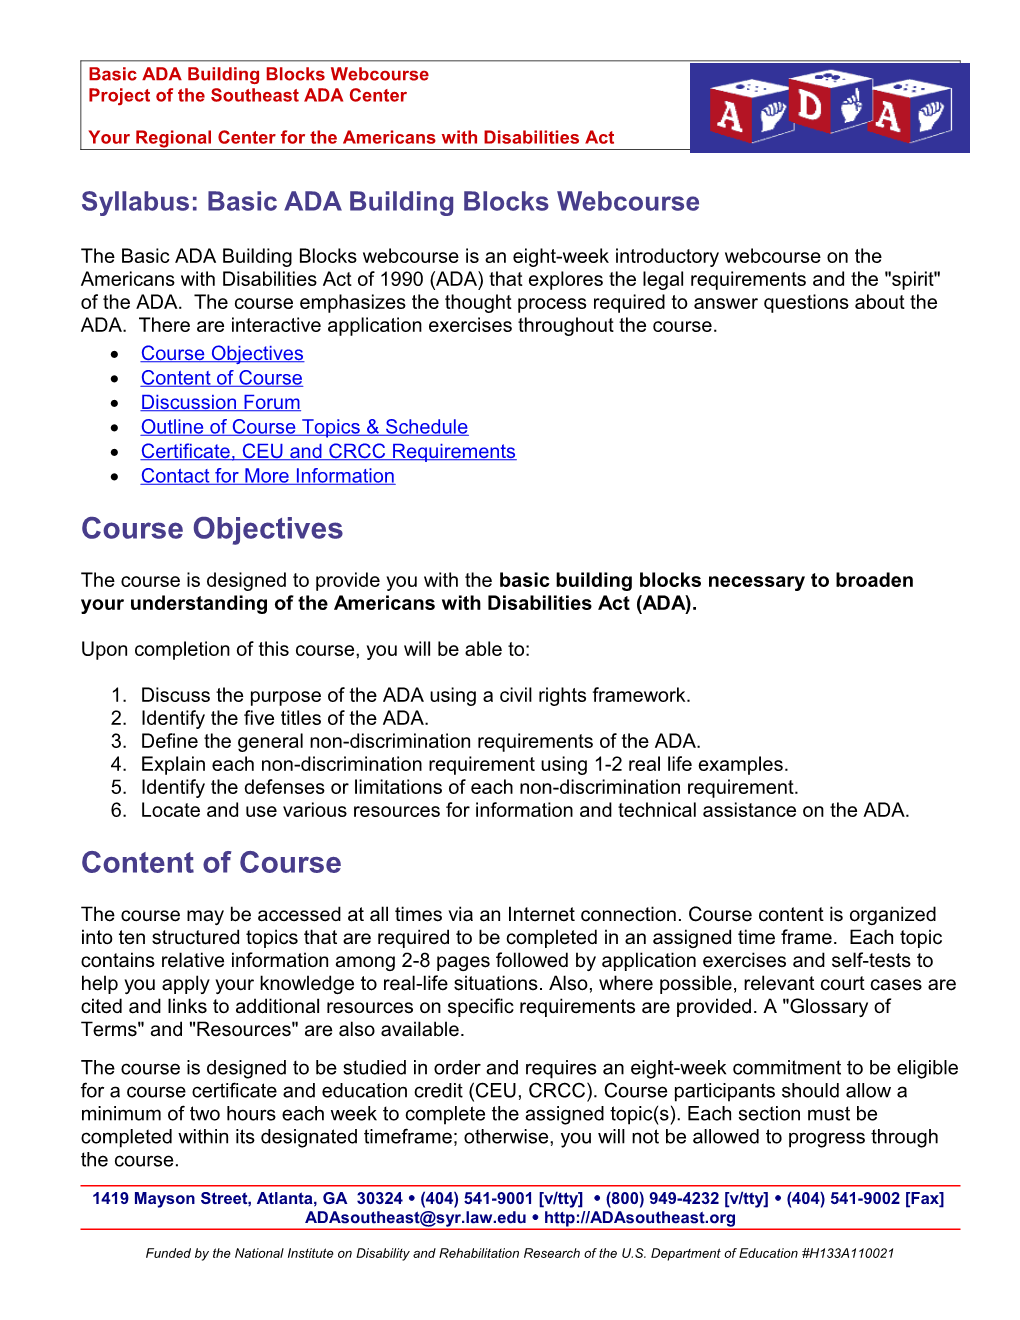 Basic ADA Building Blocks Course Overview